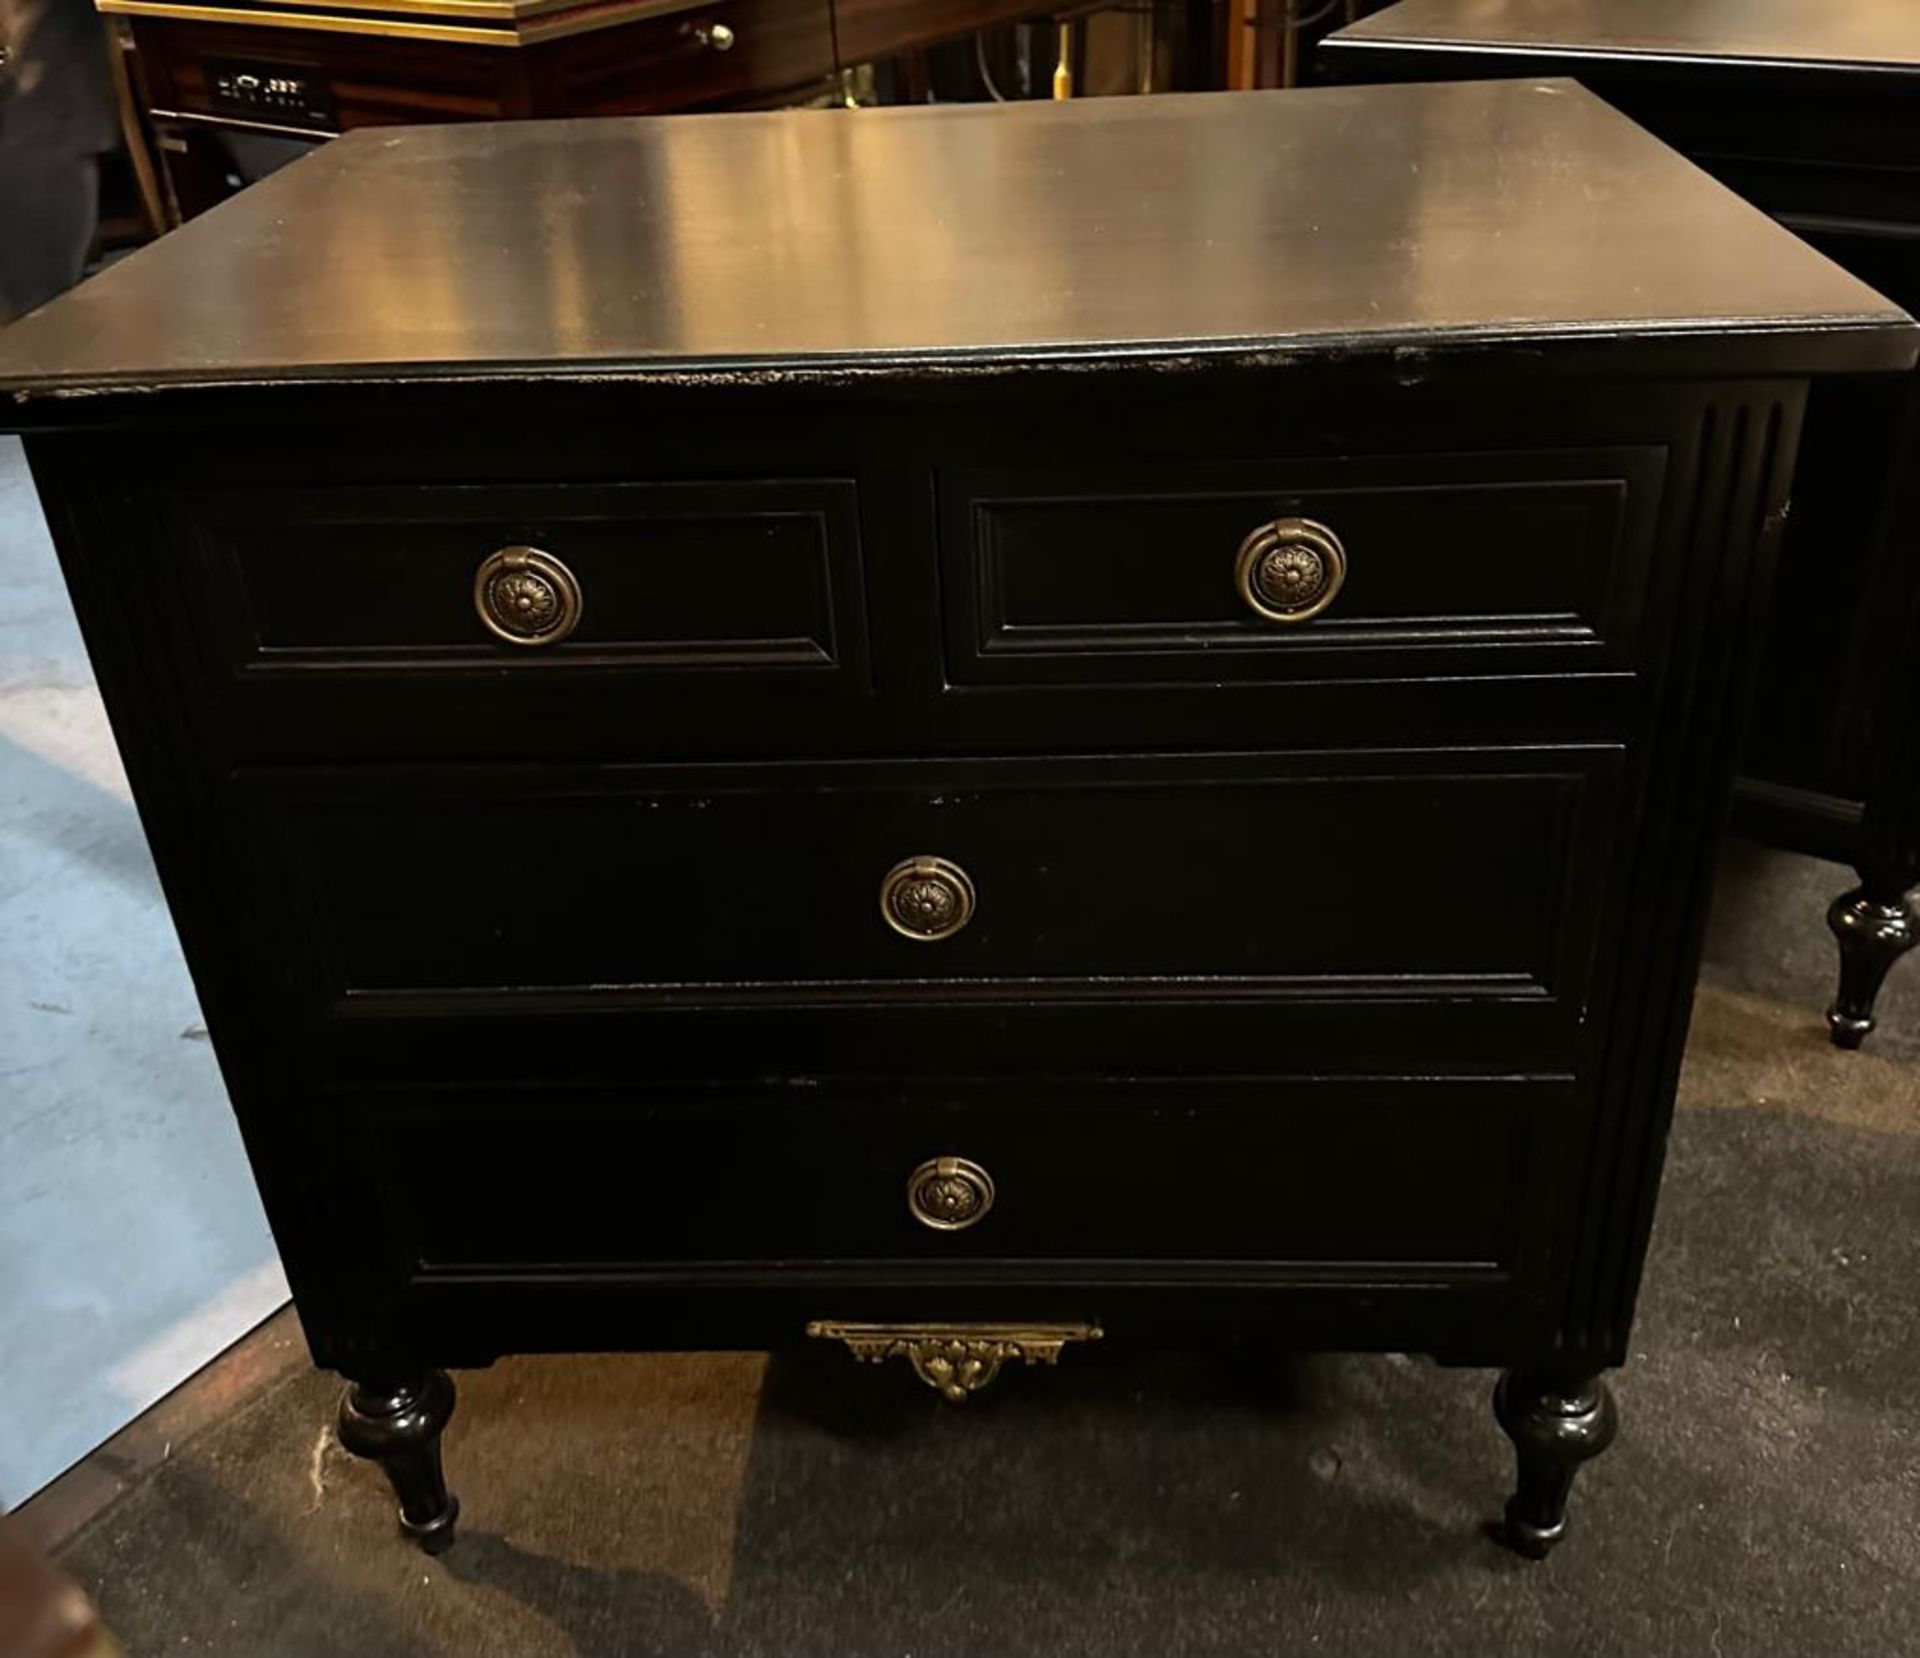 A Pair Four Drawer Commode Chests Raised By Four Block Feet With A Square Carved Motif And Scrolled - Image 2 of 2